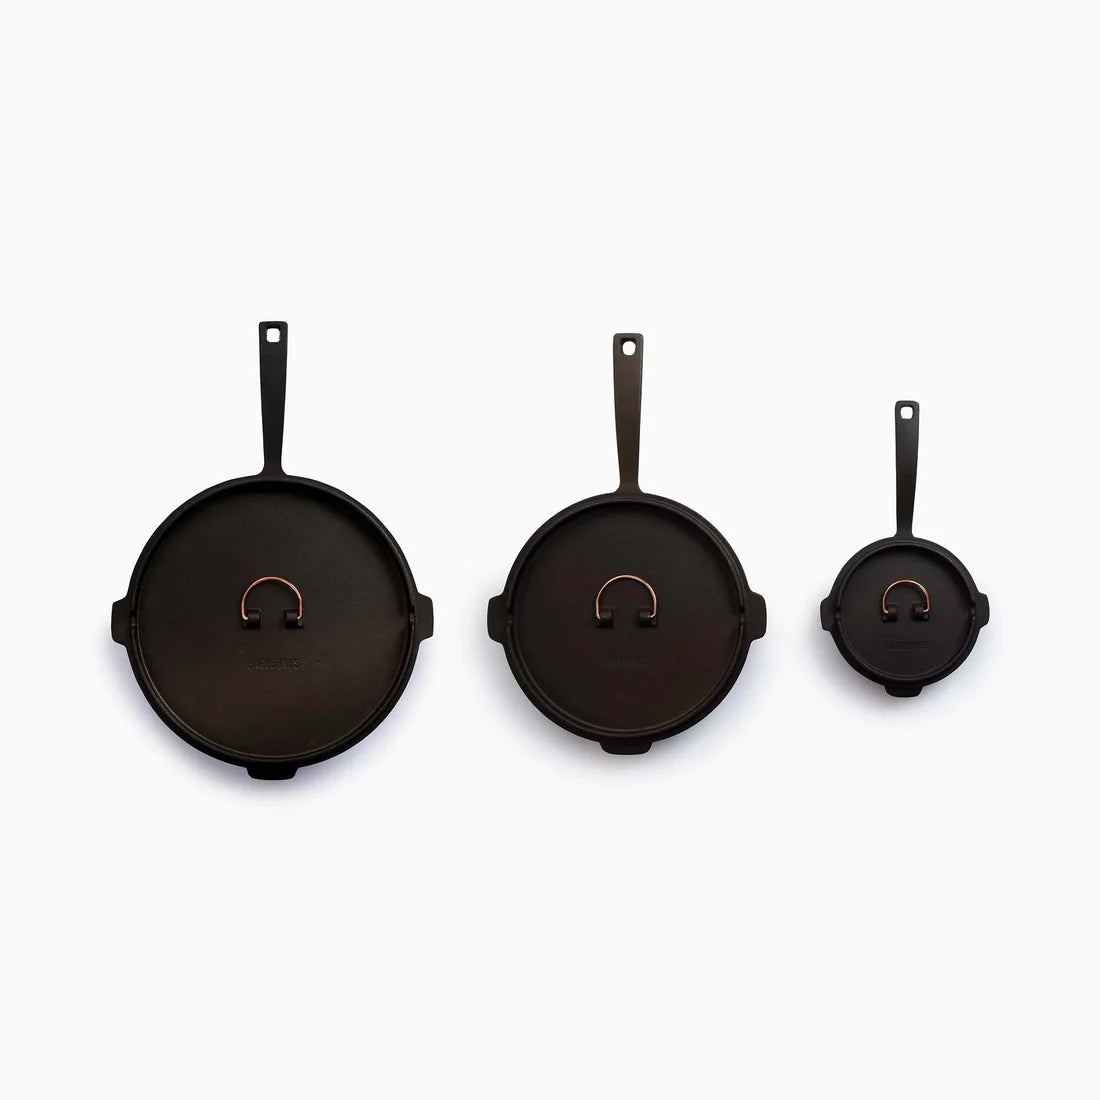 All-in-One Cast Iron Skillet